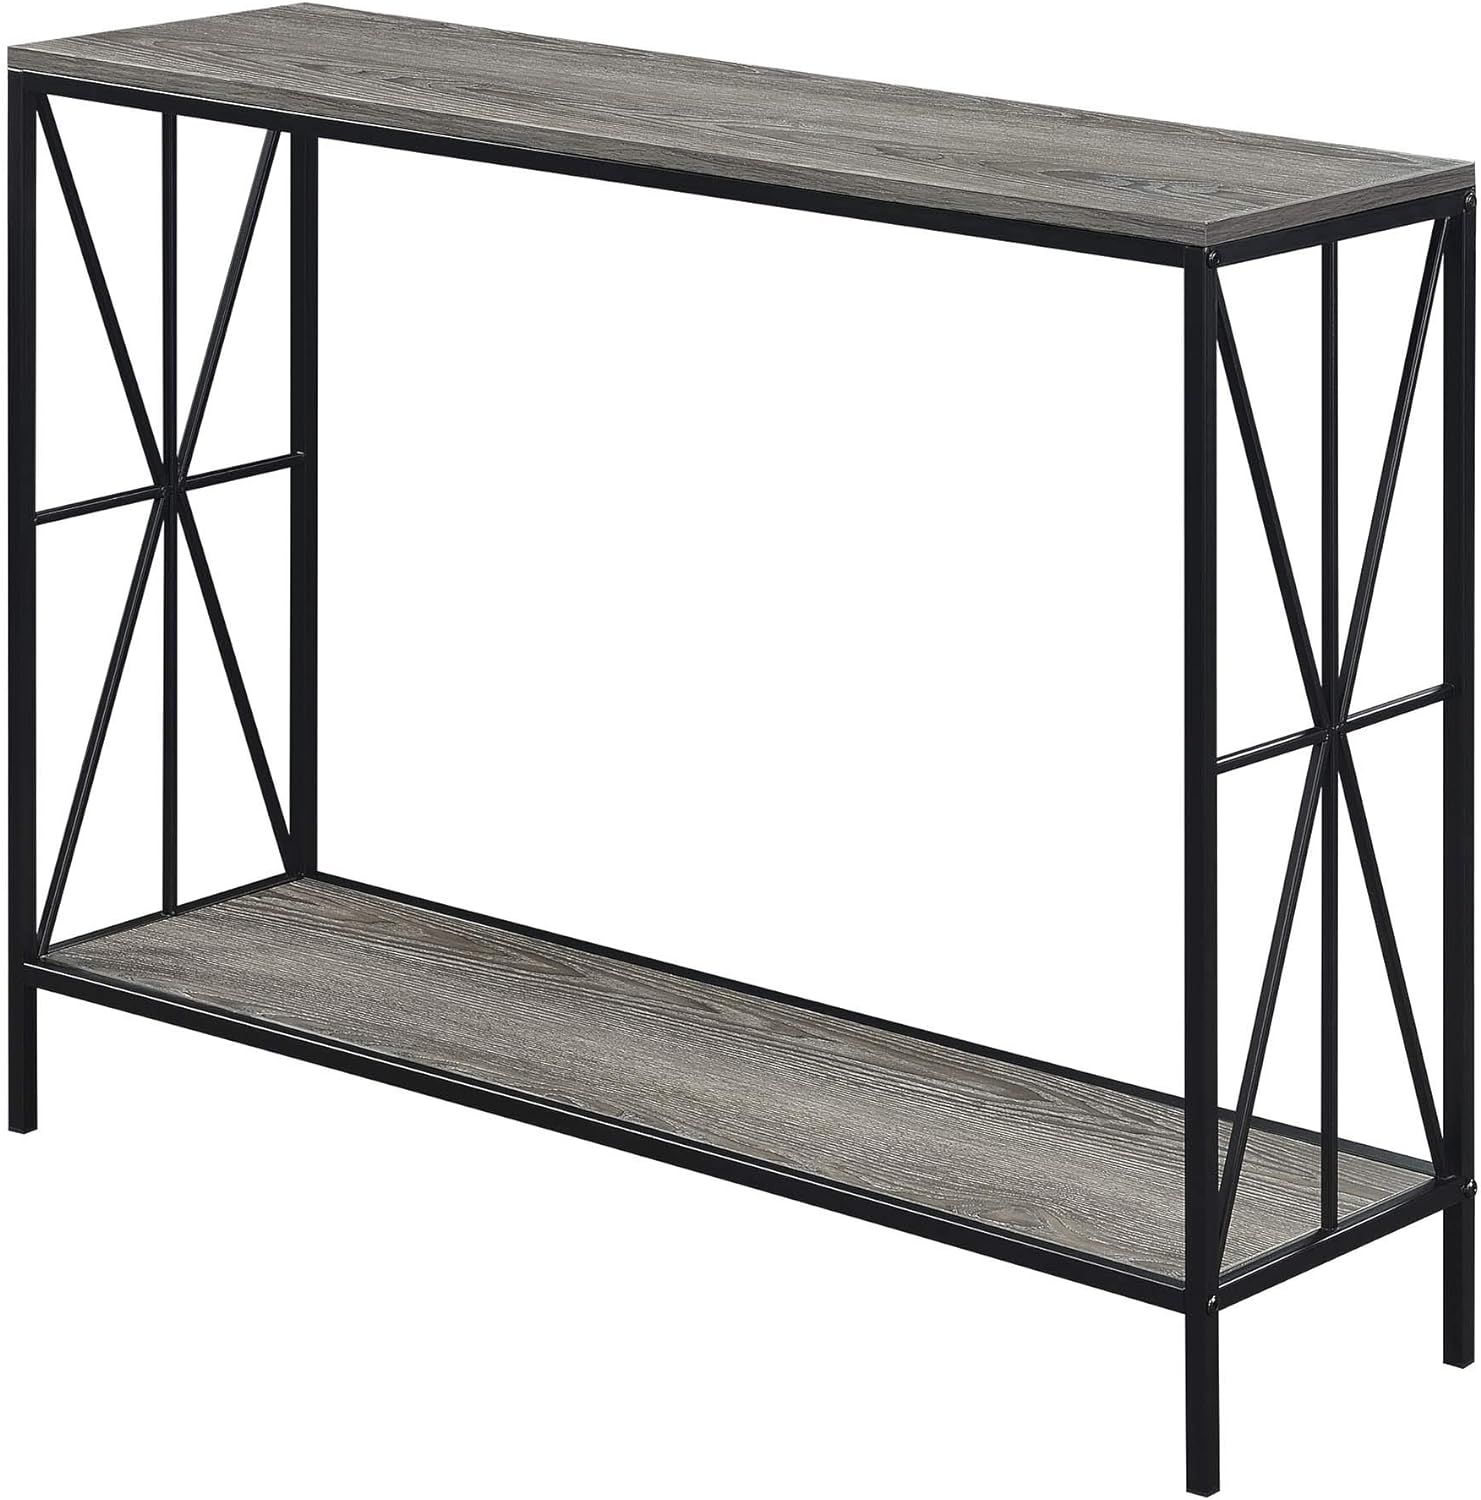 Convenience Concepts Tucson Starburst Console Table, Weathered Gray/Black | Amazon (US)